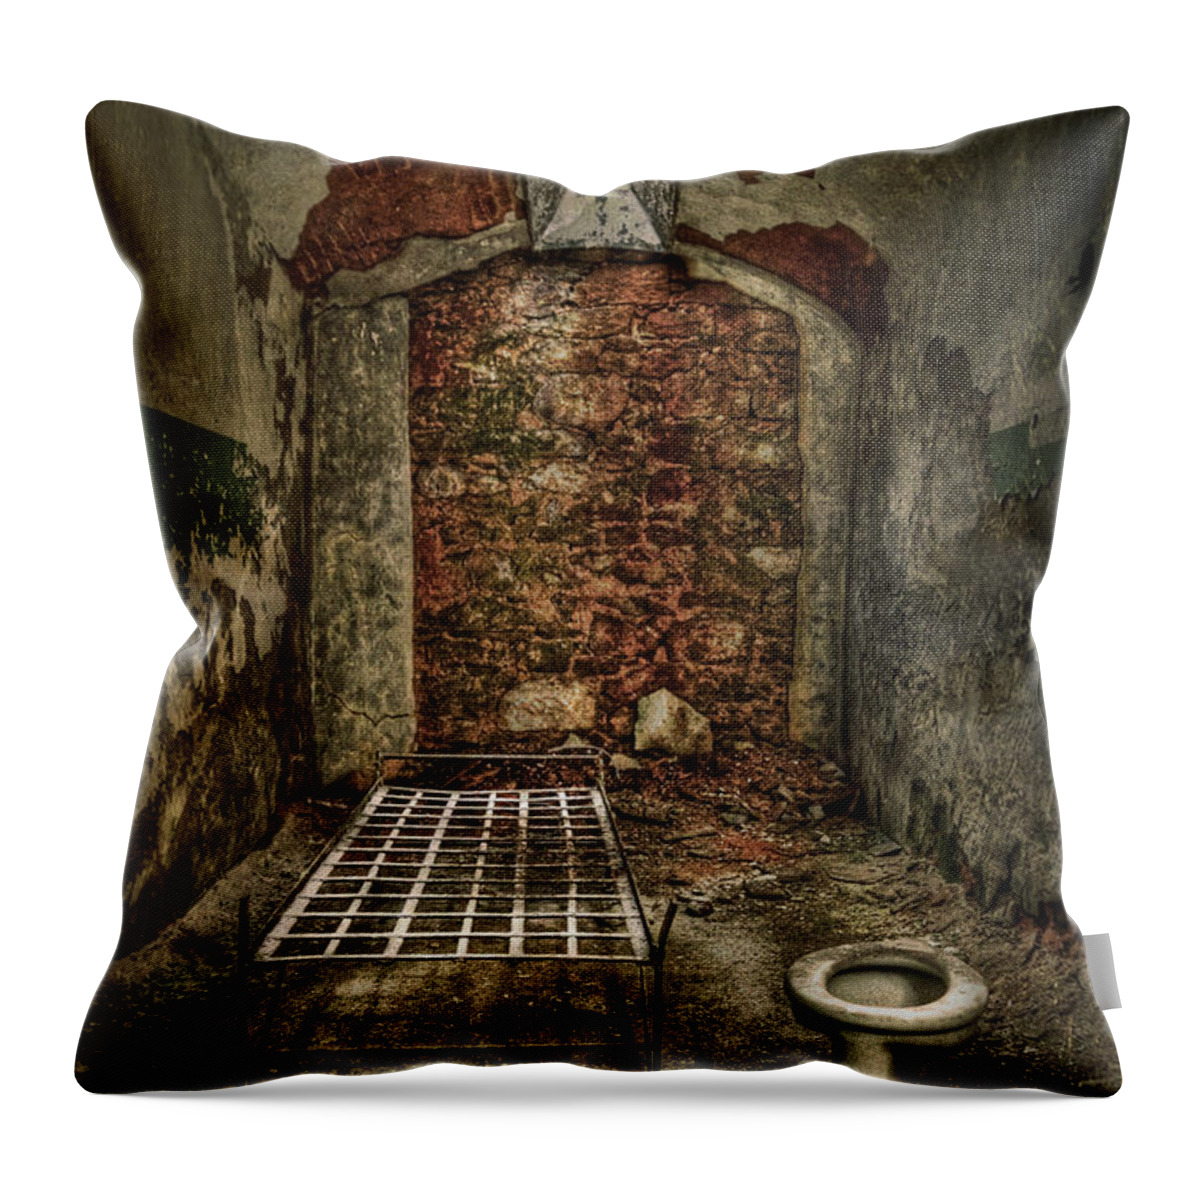 Jail Throw Pillow featuring the photograph The Life of Crime by Evelina Kremsdorf